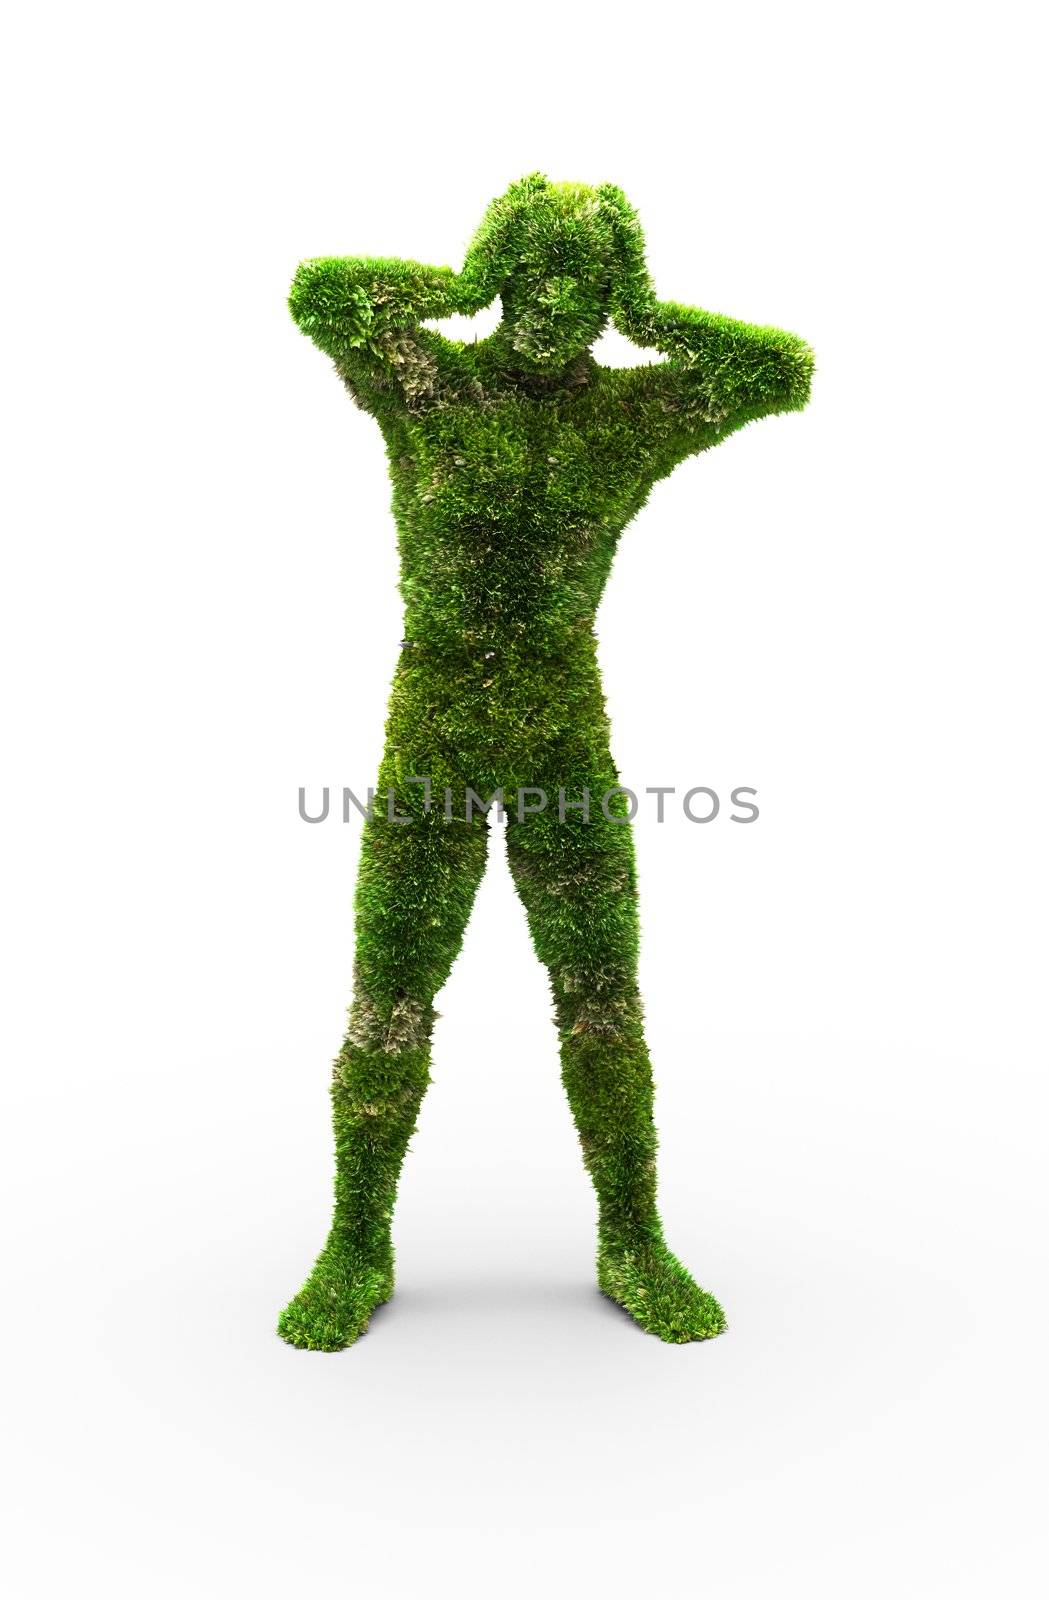 Herbal man made in 3D graphics